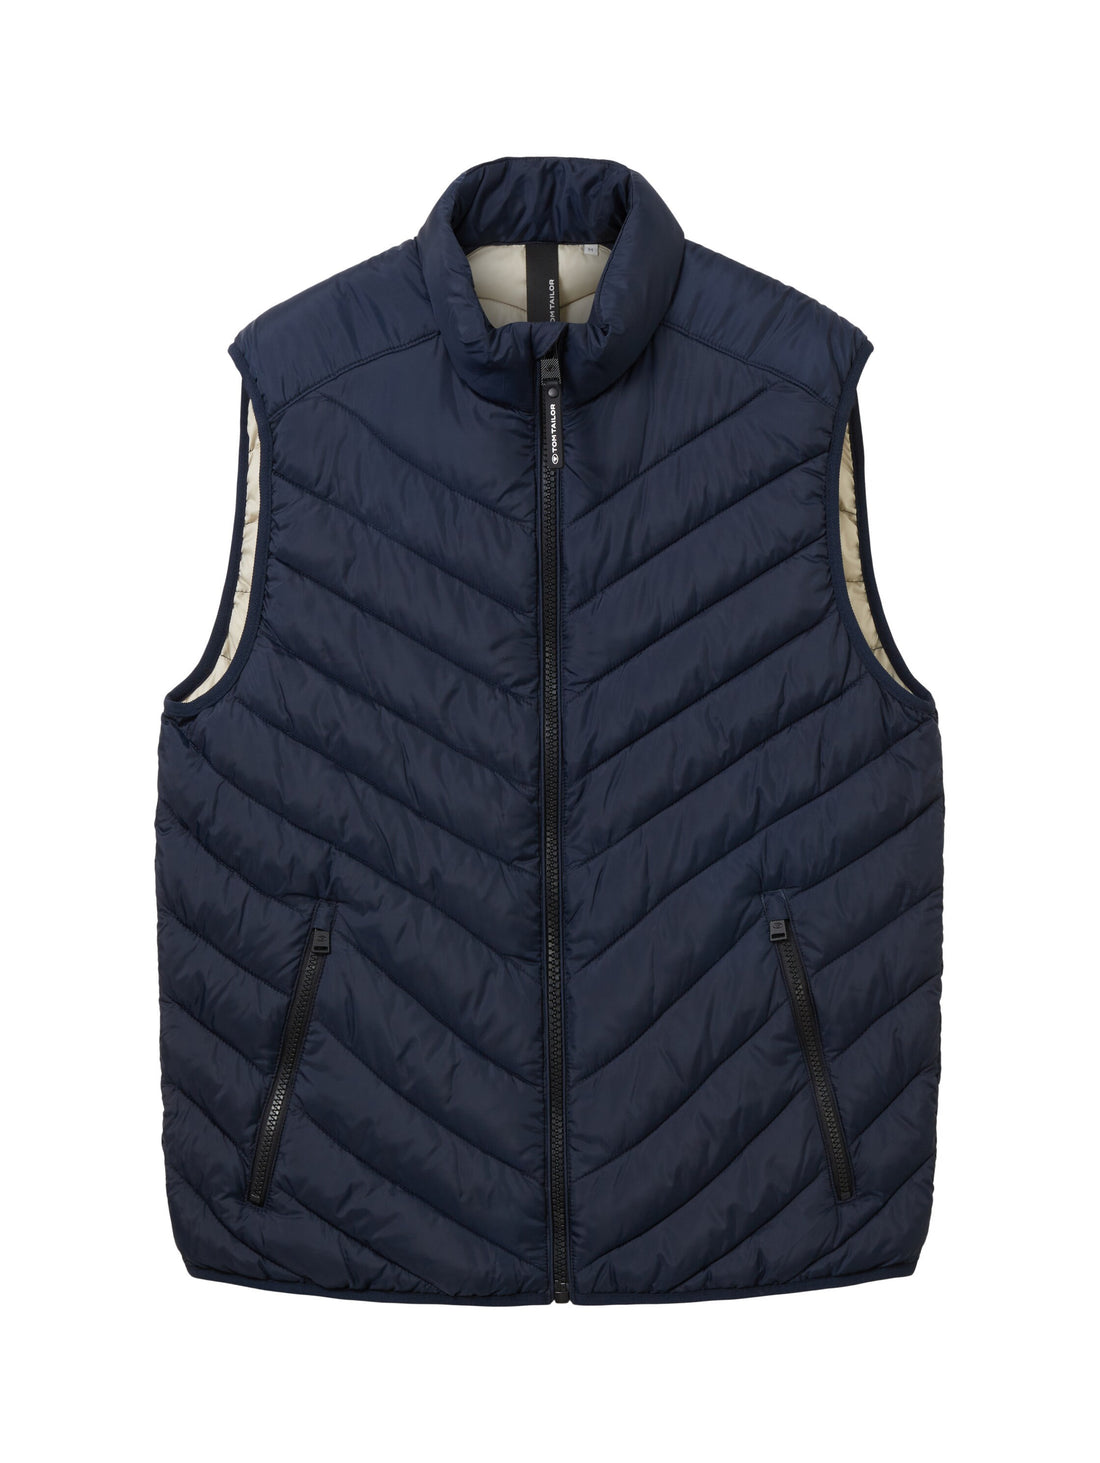 Quilted Puffer Light Weight Vest_1036072_10668_01